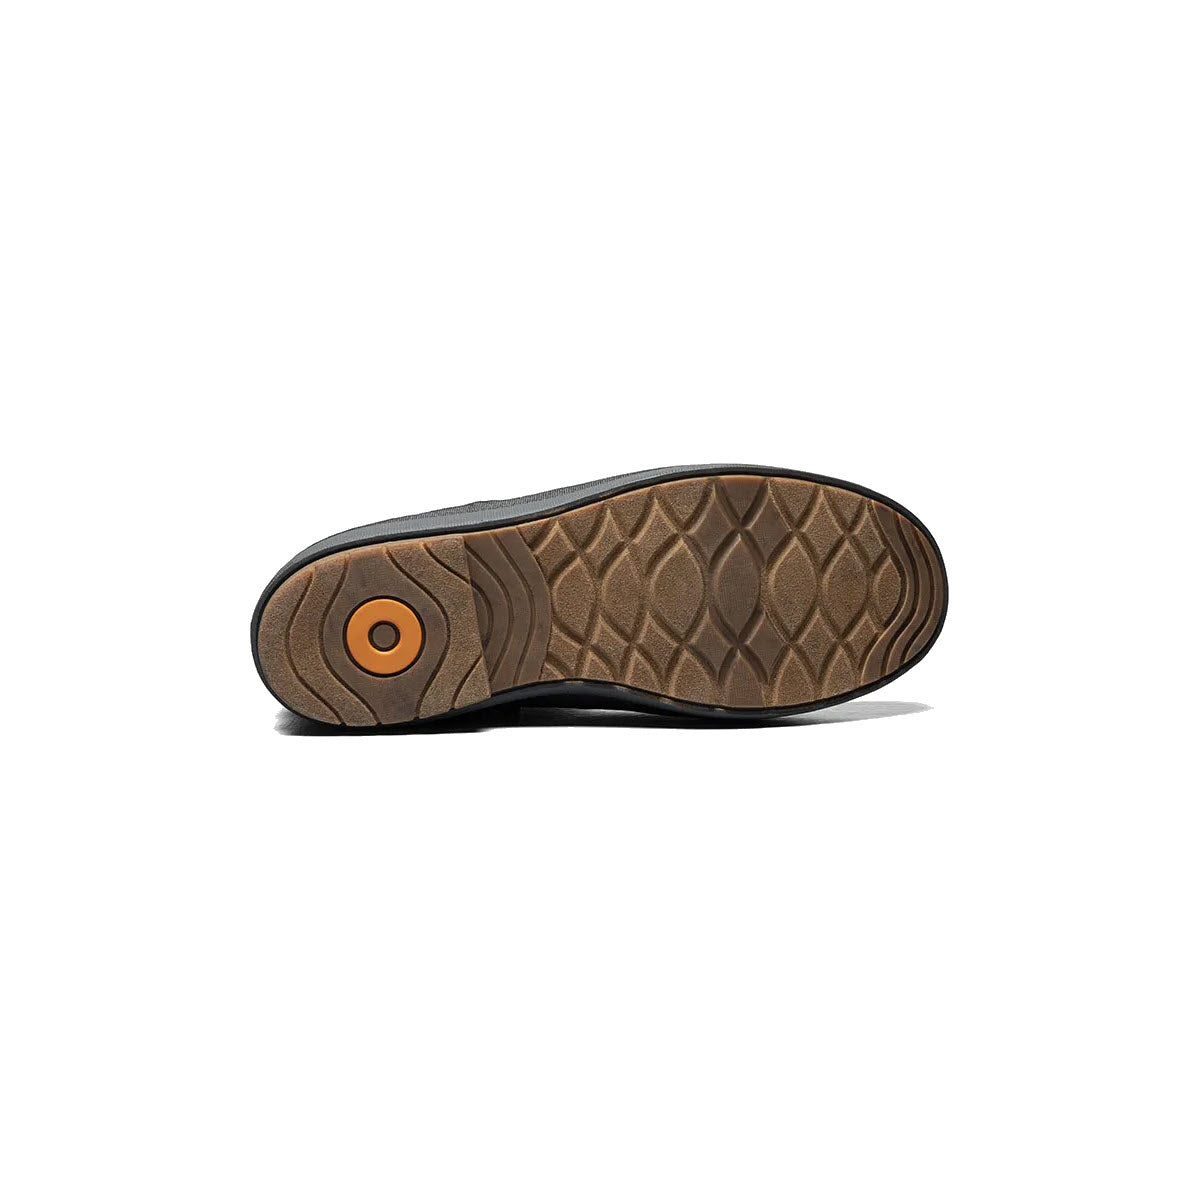 Sentence with replacement: Sole of a Bogs women&#39;s snow boot featuring a brown tread pattern with a circular orange logo, displayed against a white background.